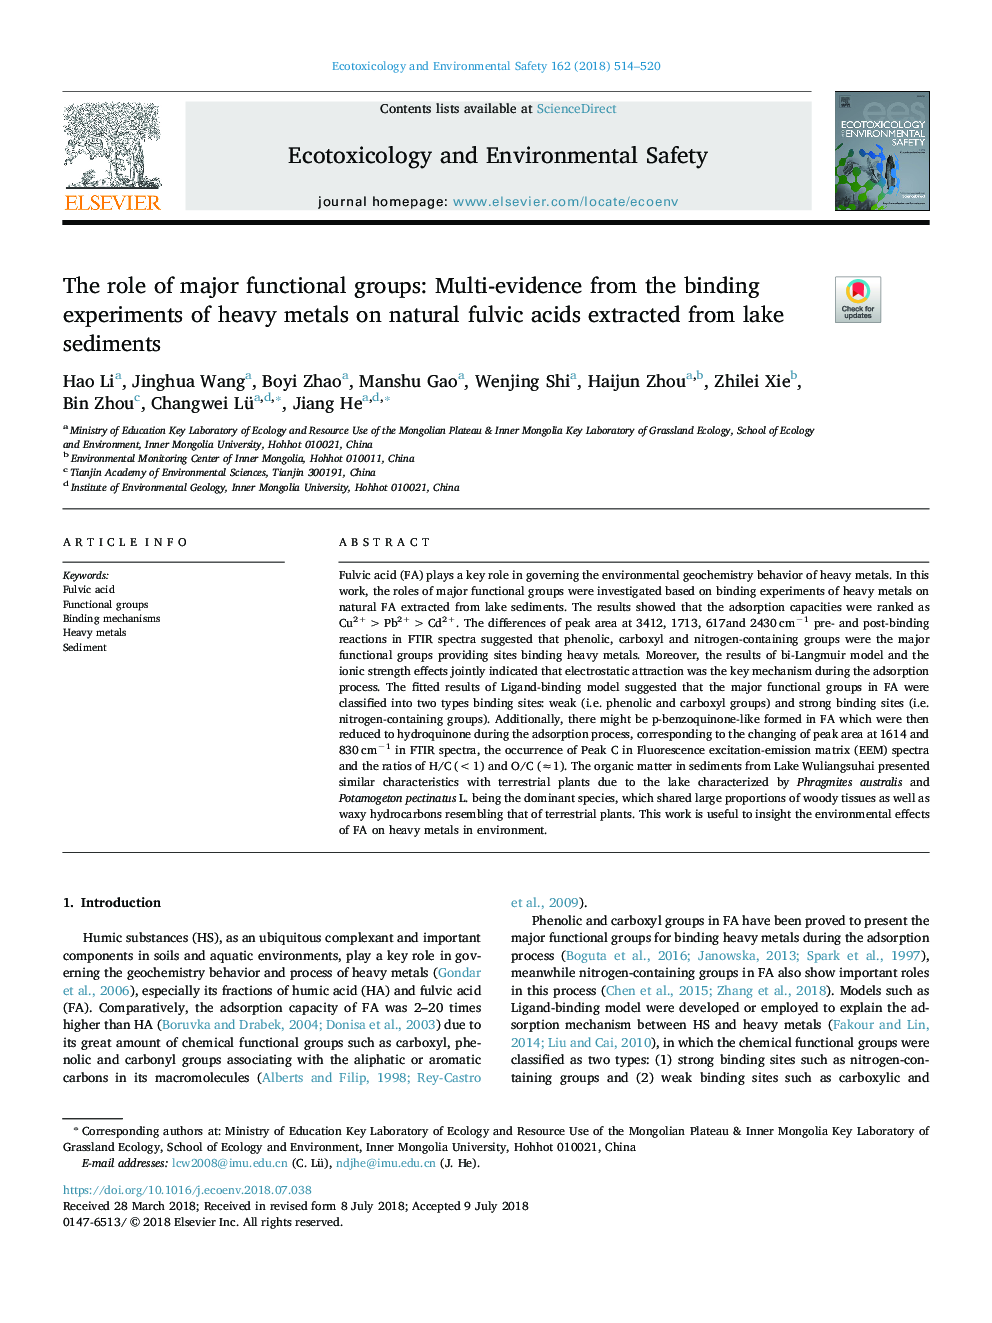 The role of major functional groups: Multi-evidence from the binding experiments of heavy metals on natural fulvic acids extracted from lake sediments